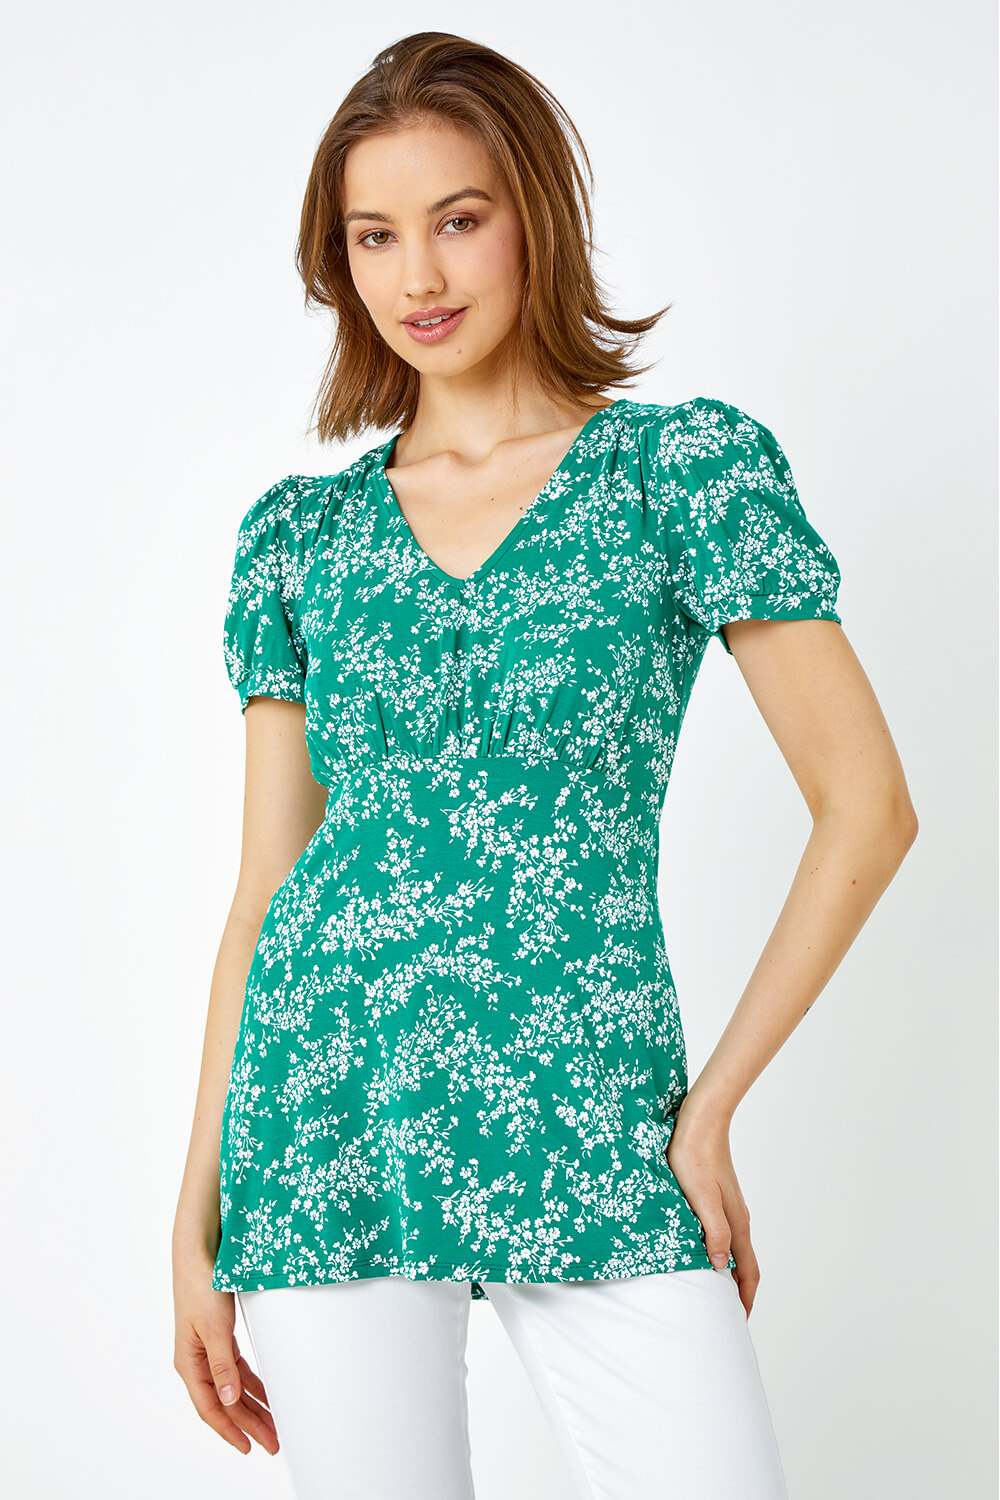 Green Ditsy Floral Print Stretch T-Shirt, Image 2 of 5